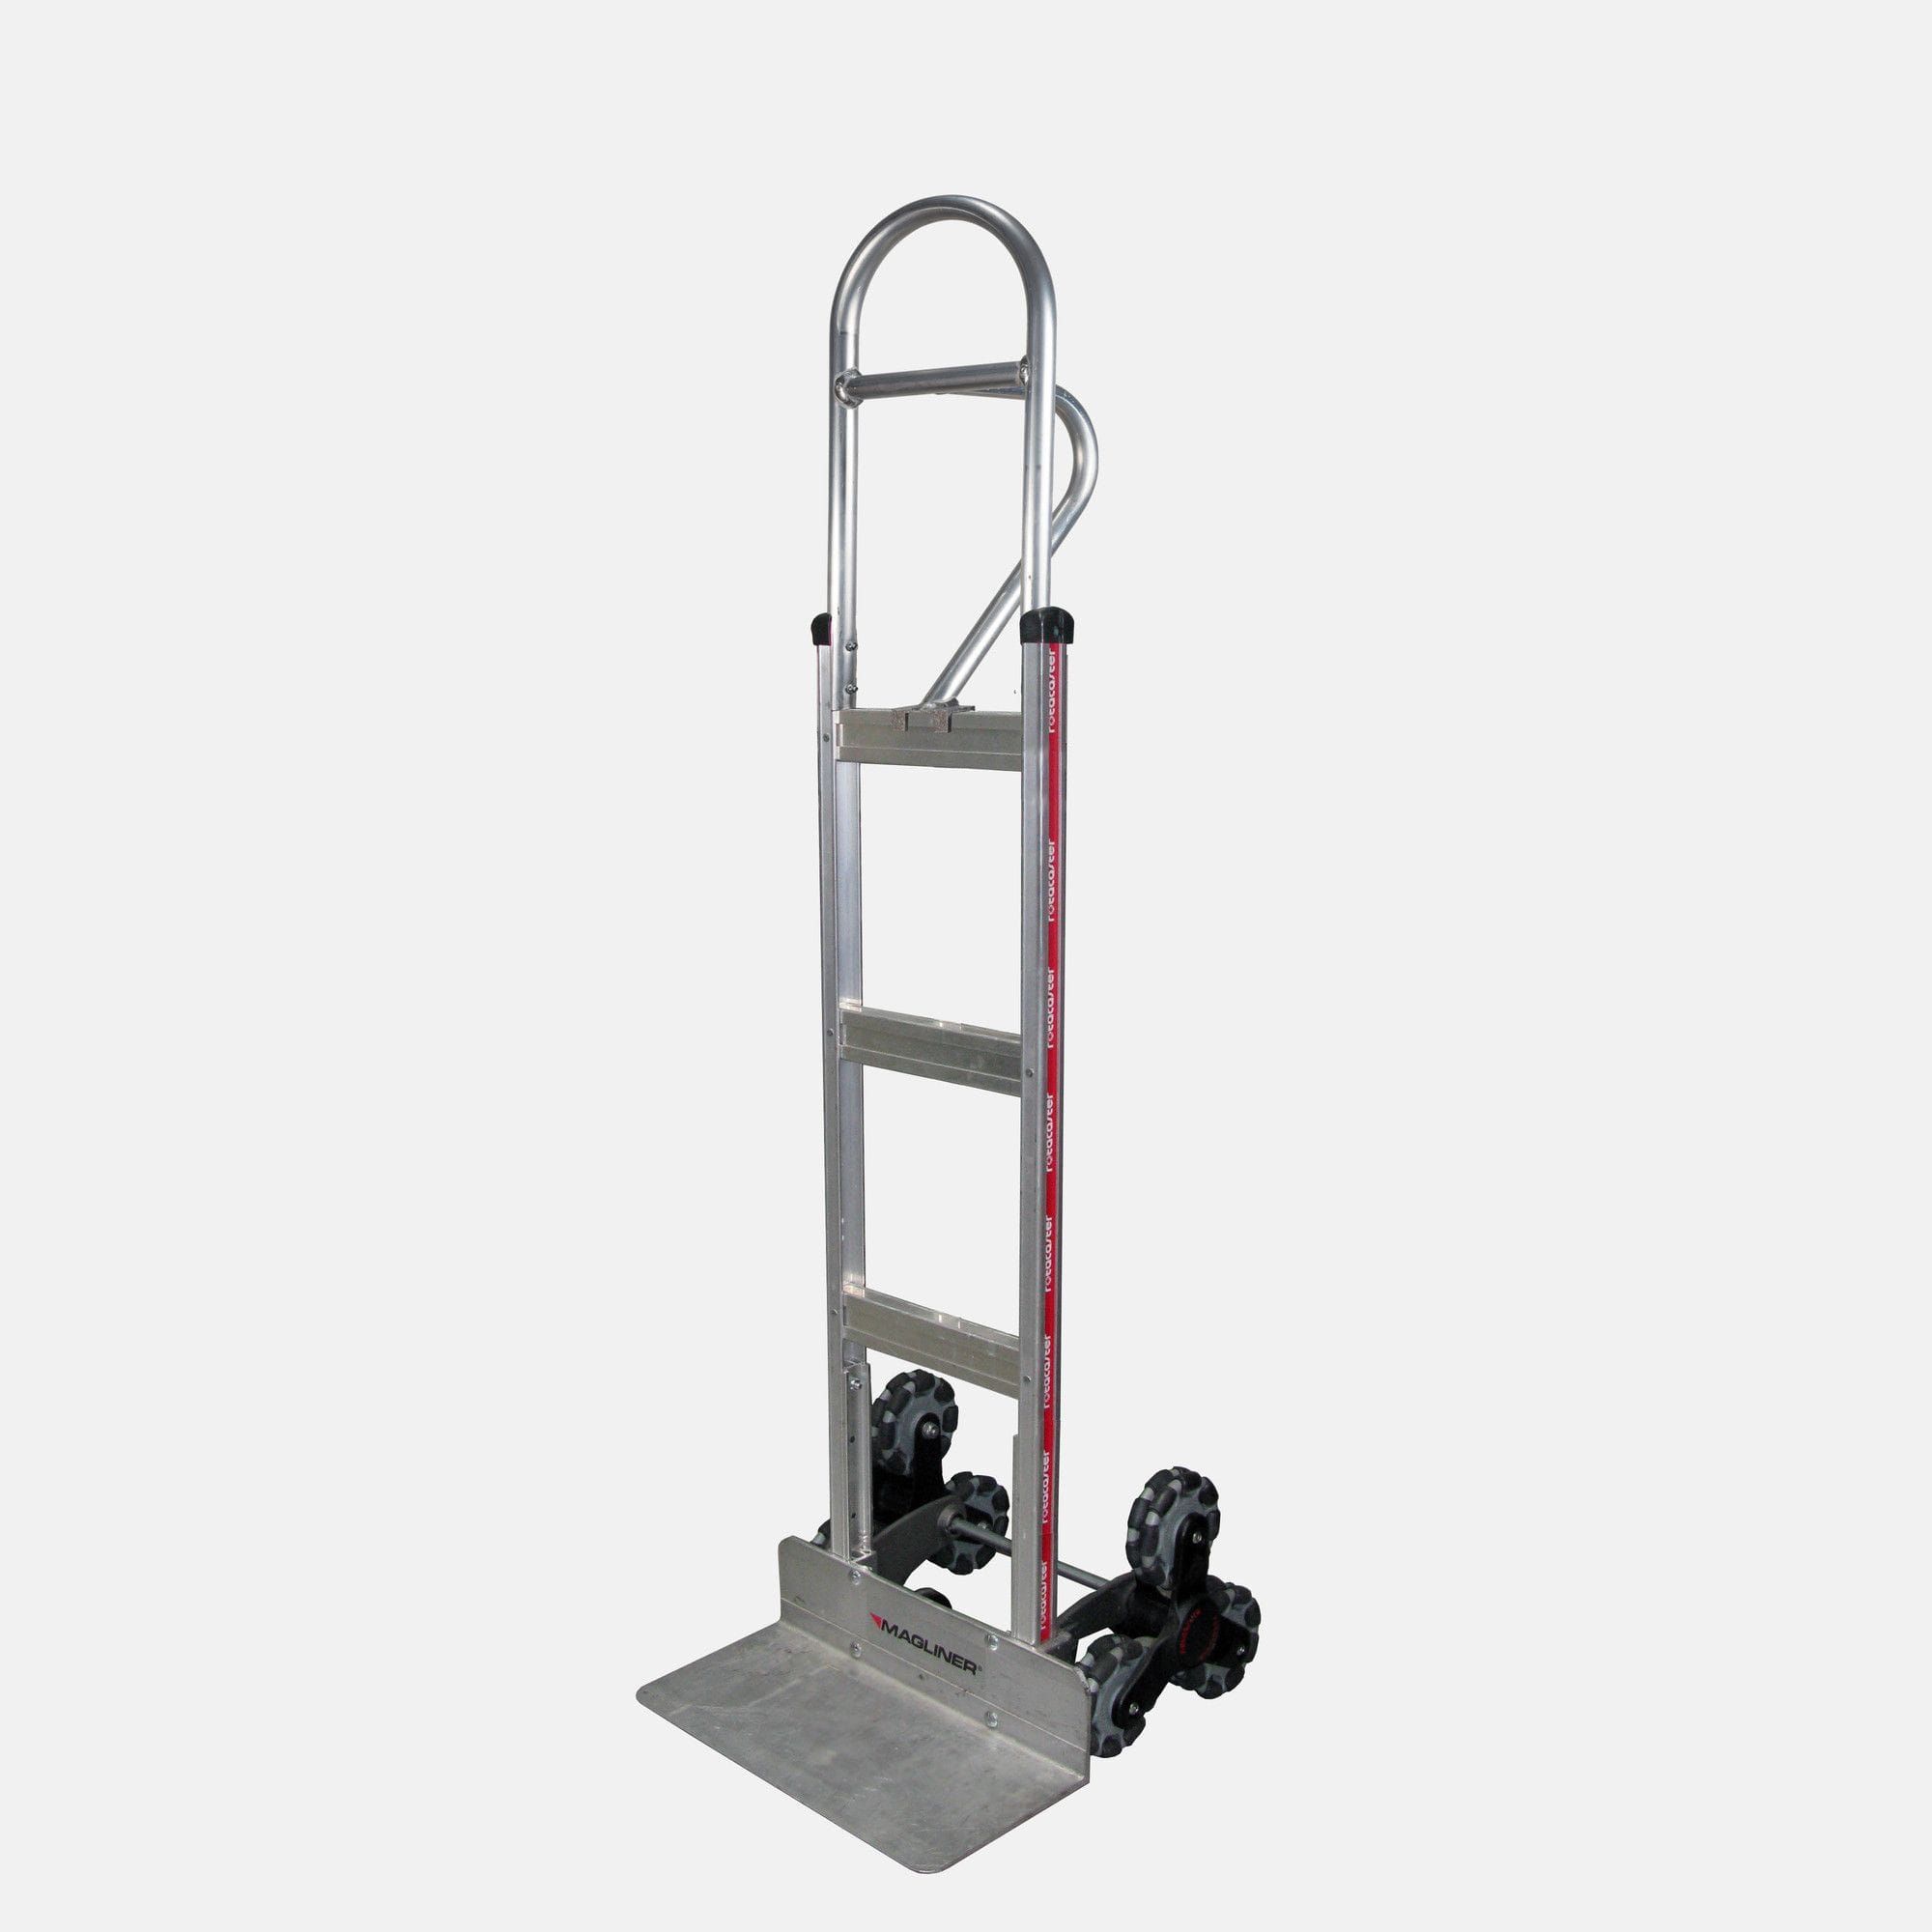 Rotacaster Stair Climber extended Handle